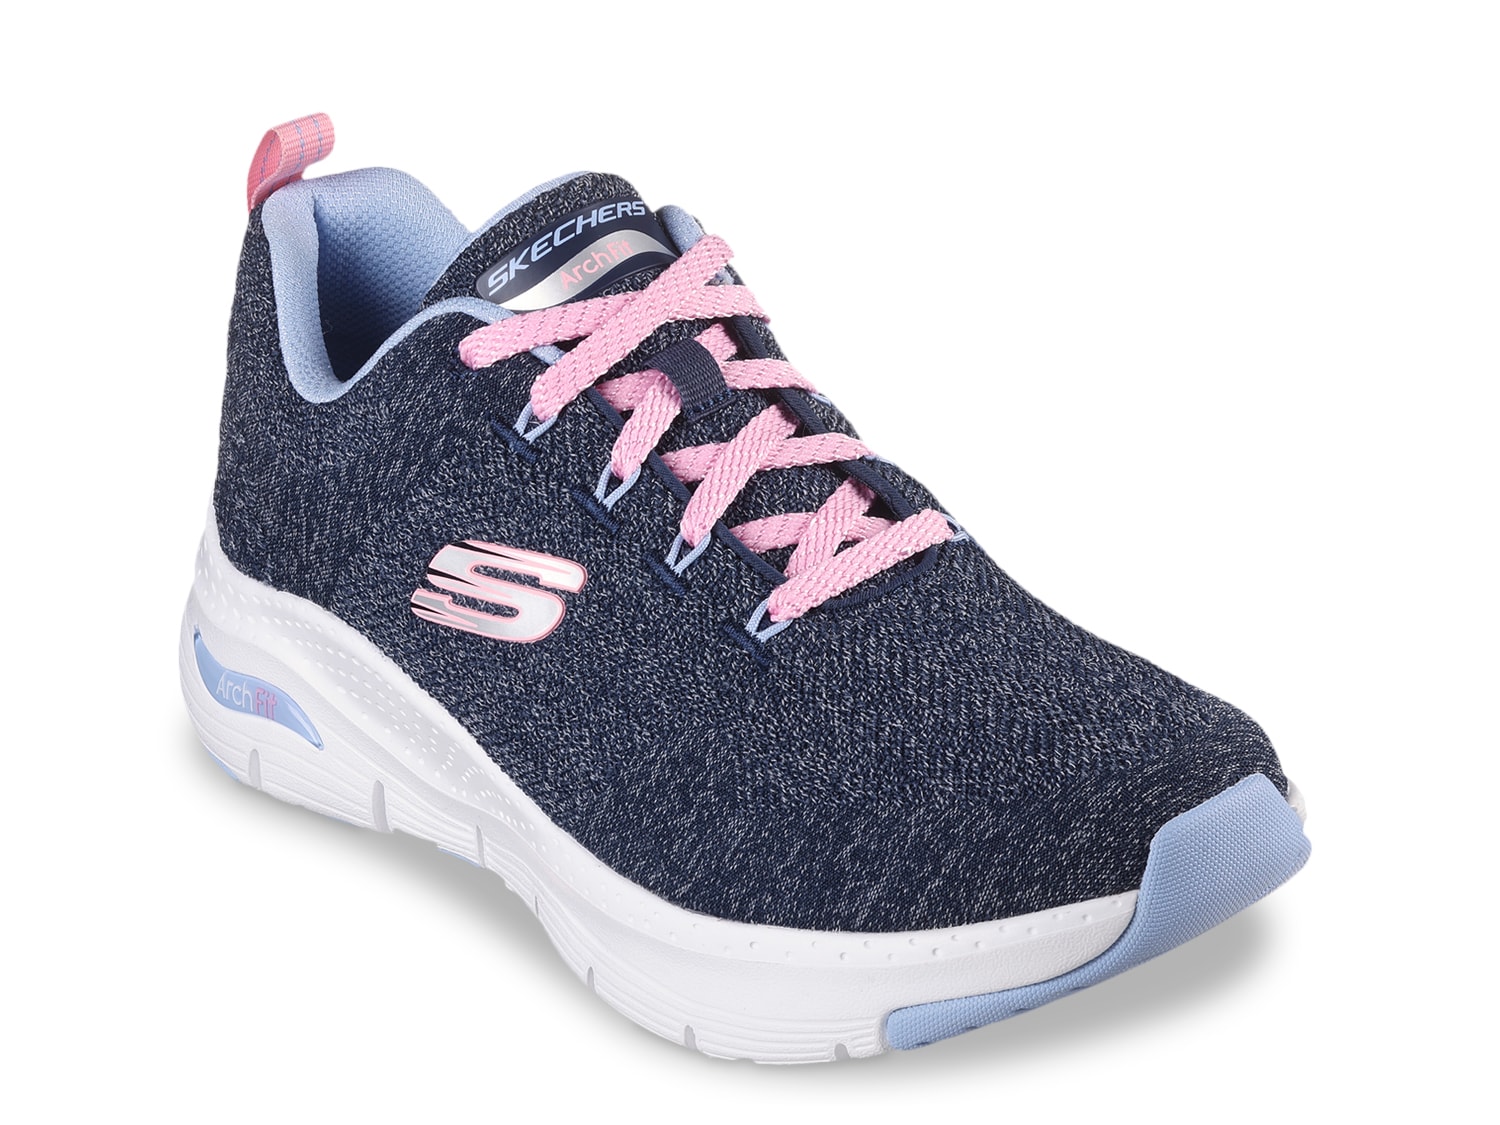 Skechers Arch Fit Comfy Wave Walking Shoe - Free Shipping DSW